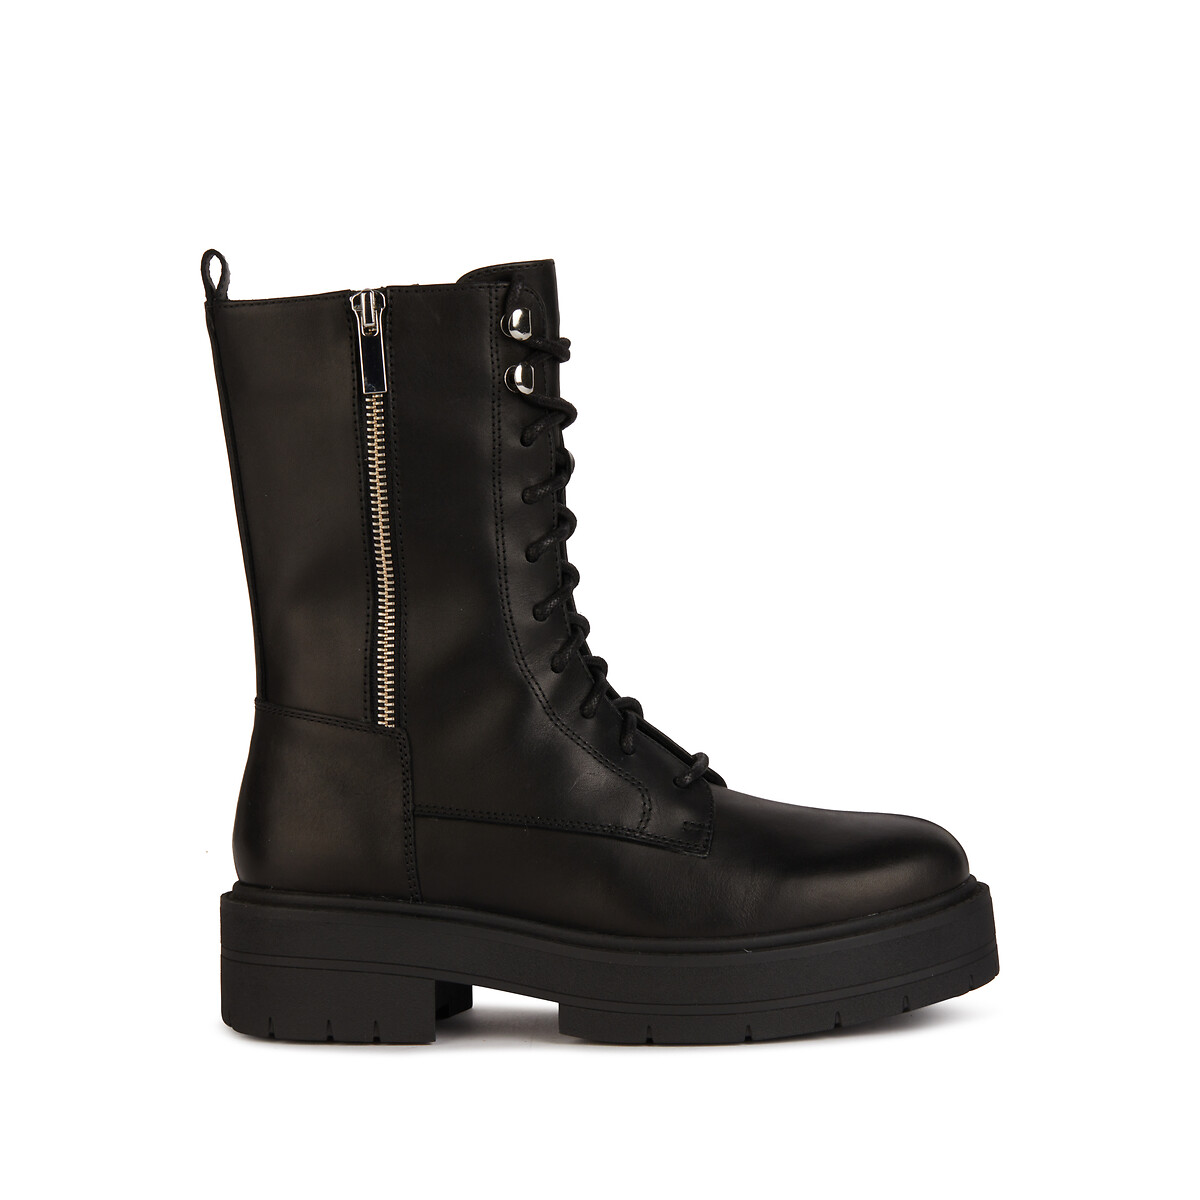 Spherica EC7 Ankle Boots in Breathable Leather with Laces